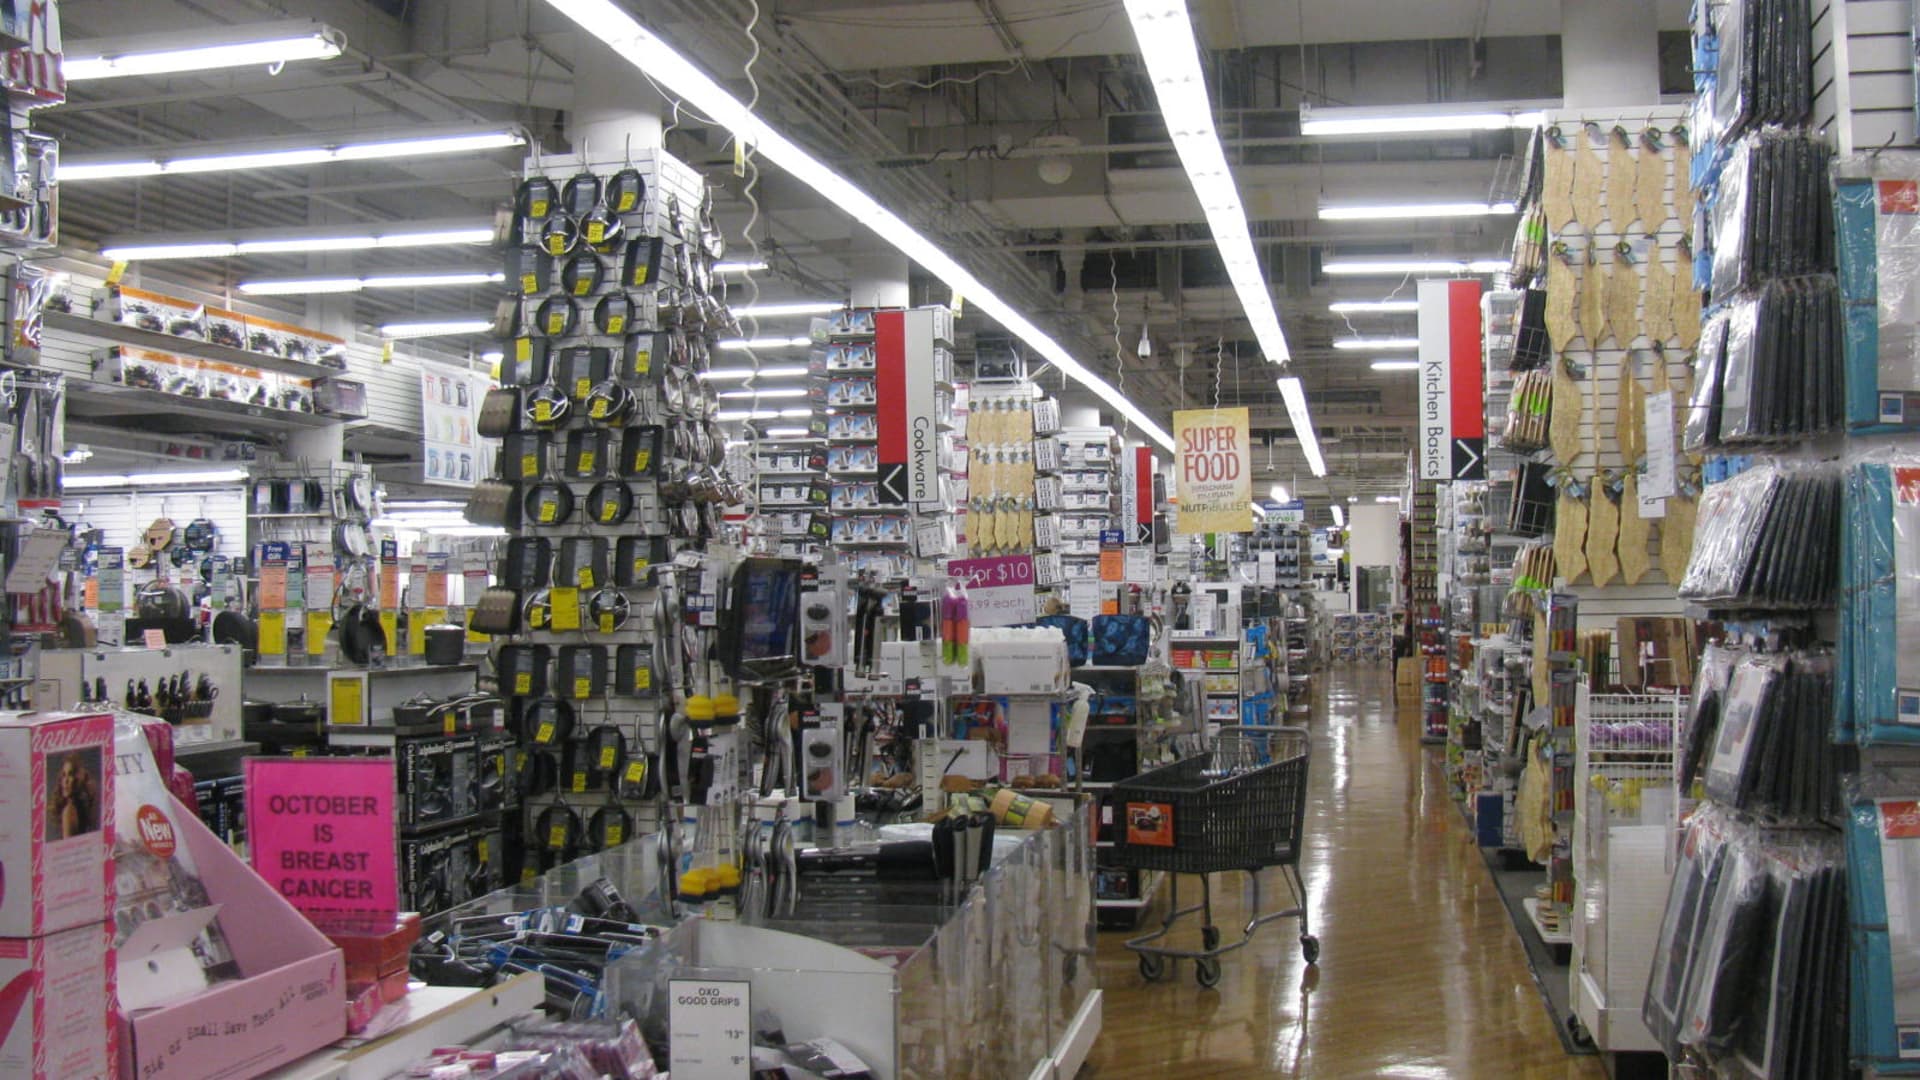 The store used to be cluttered with merchandise piled high to the ceiling.